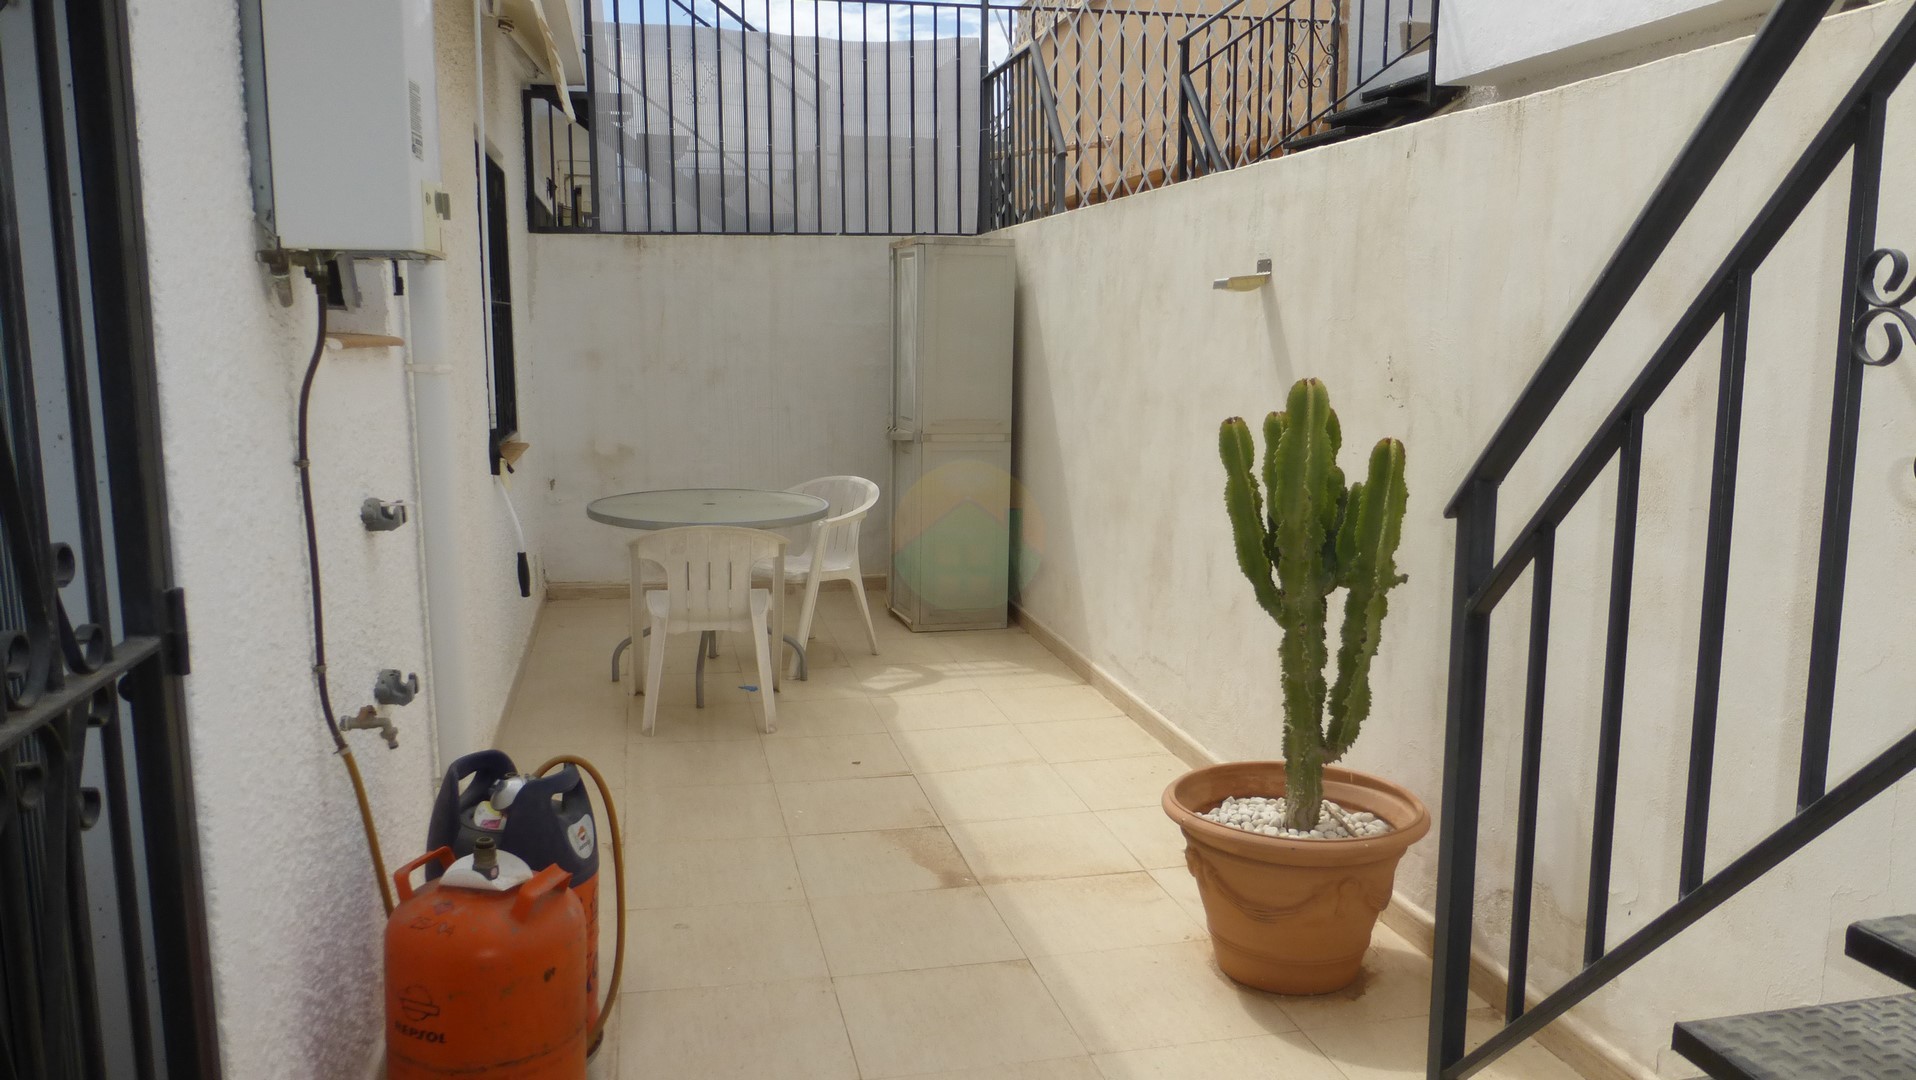 2 bedroom Terraced House For sale